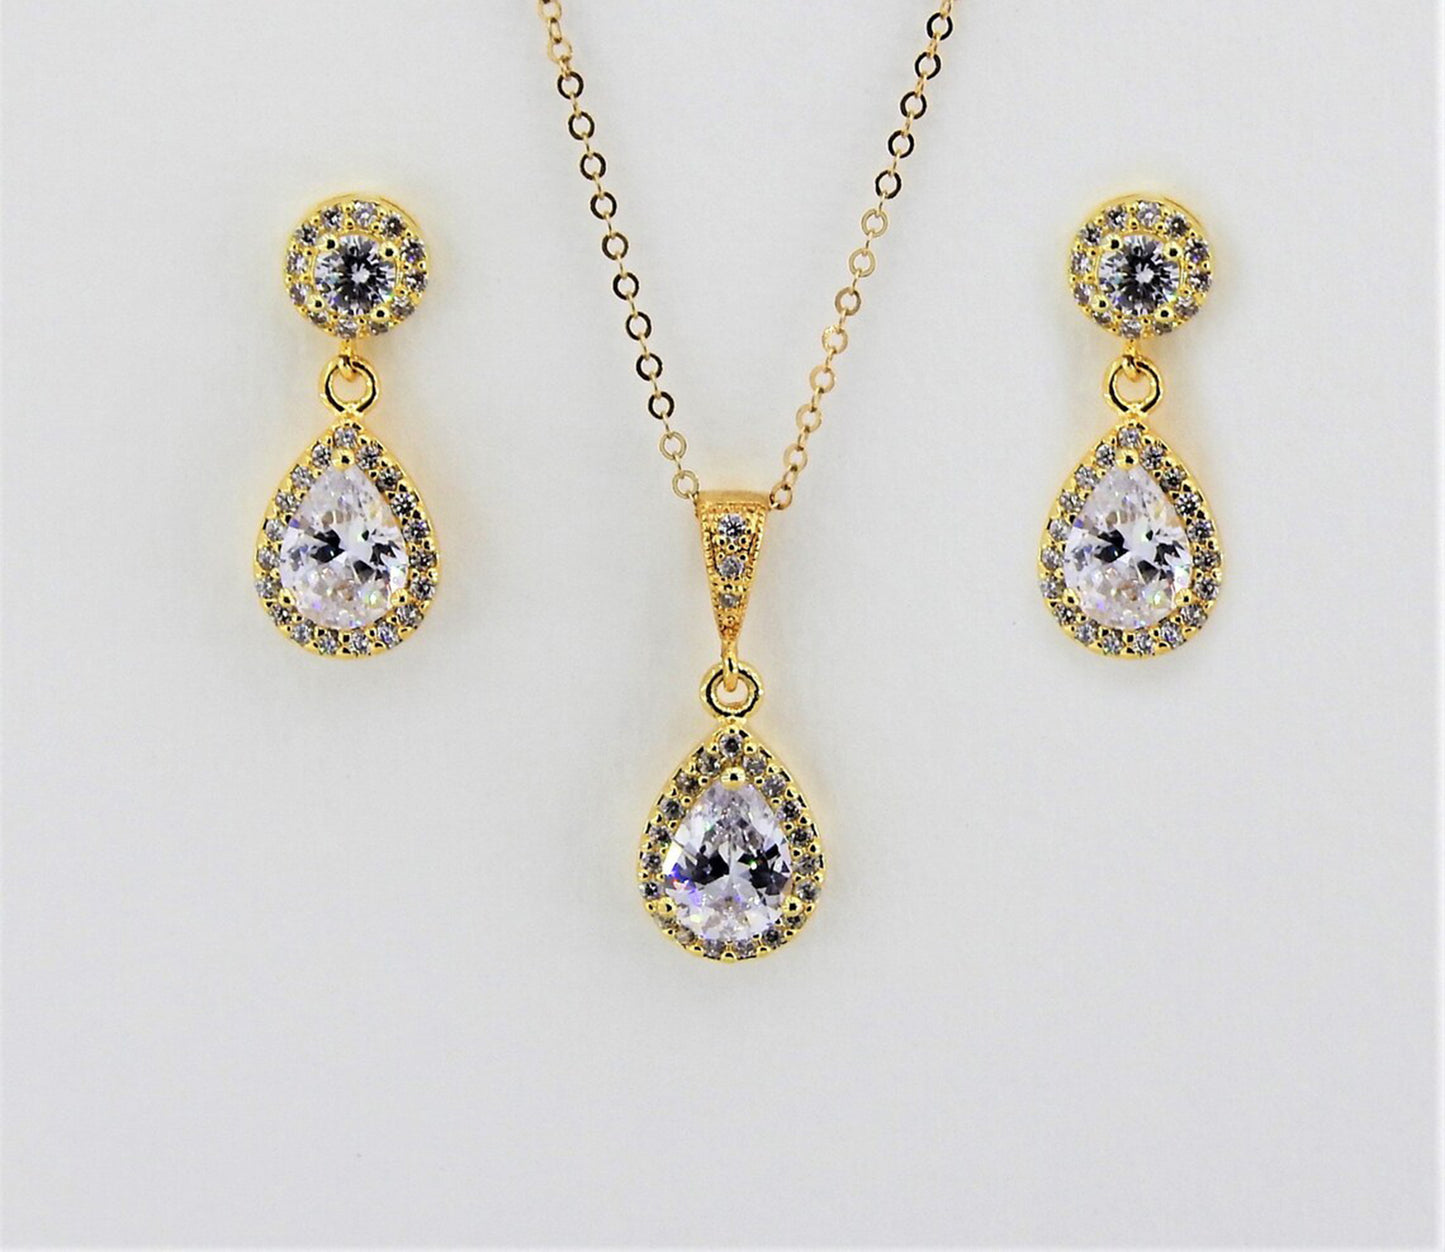 Gold filled earring and necklace set with teardrop diamond surrounded by many tiny cubic zirconias are displayed against a plain white background.